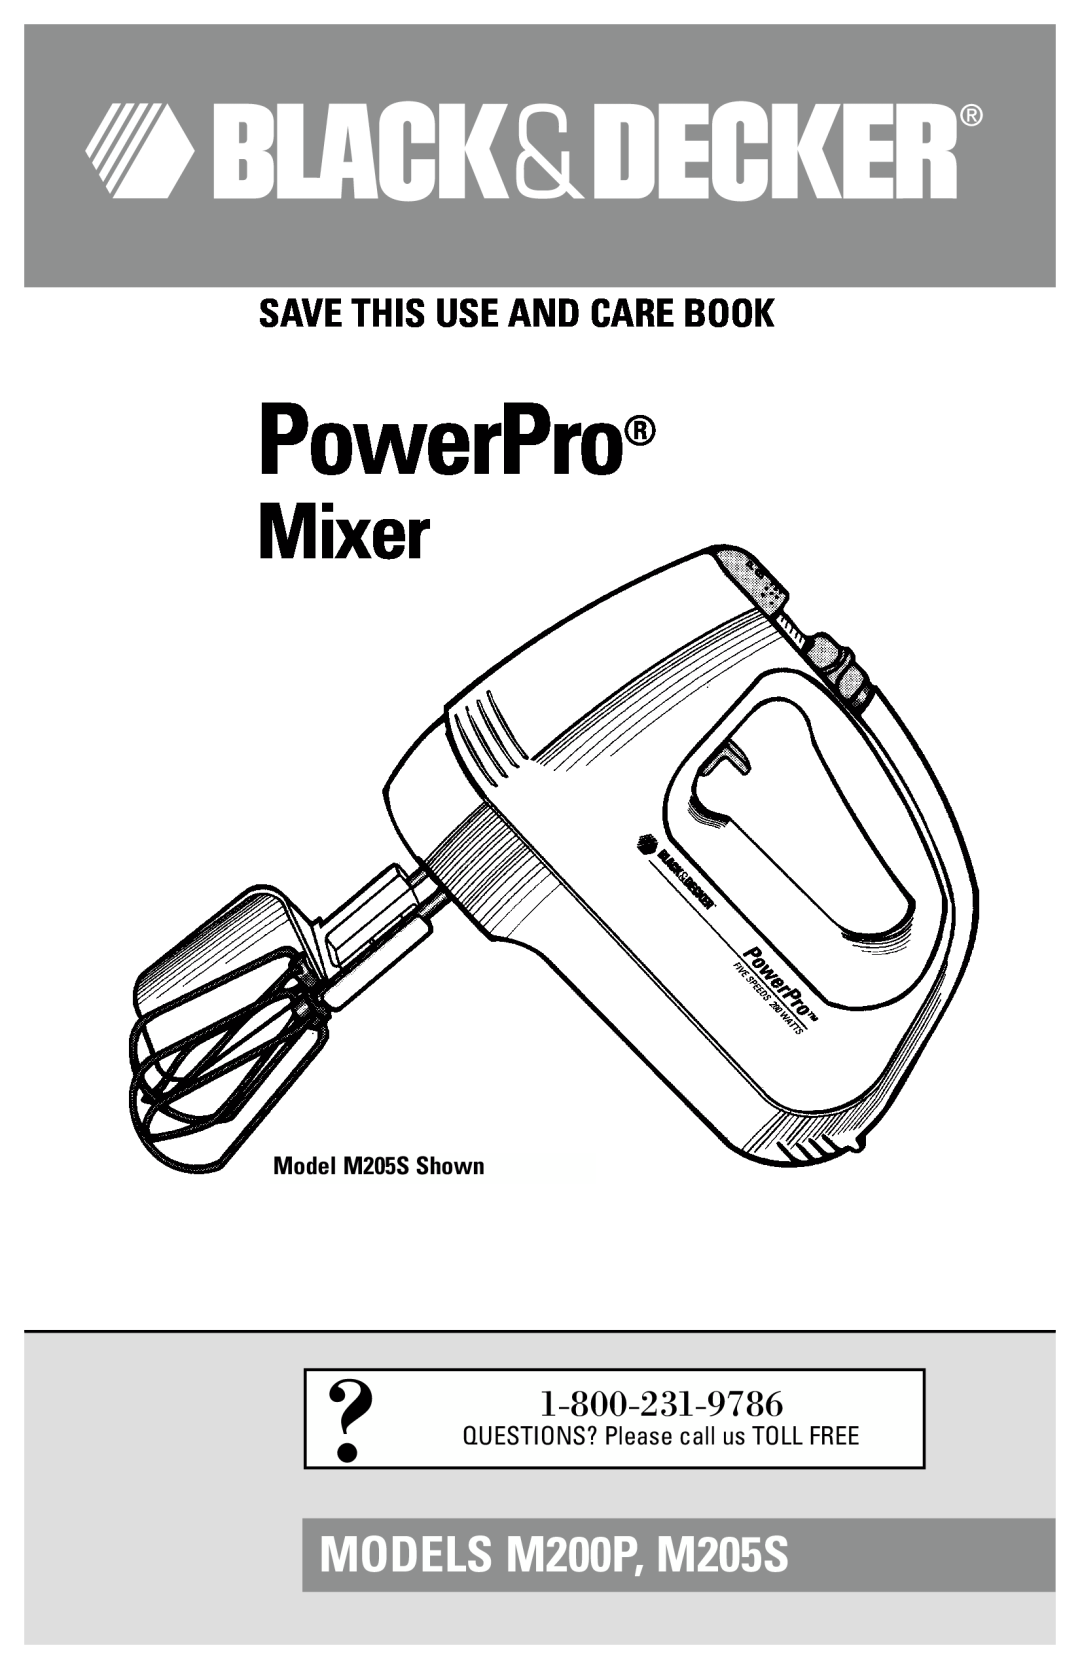 Black & Decker manual PowerPro, Mixer, MODELS M200P, M205S, Save This Use And Care Book, Model M205S Shown 